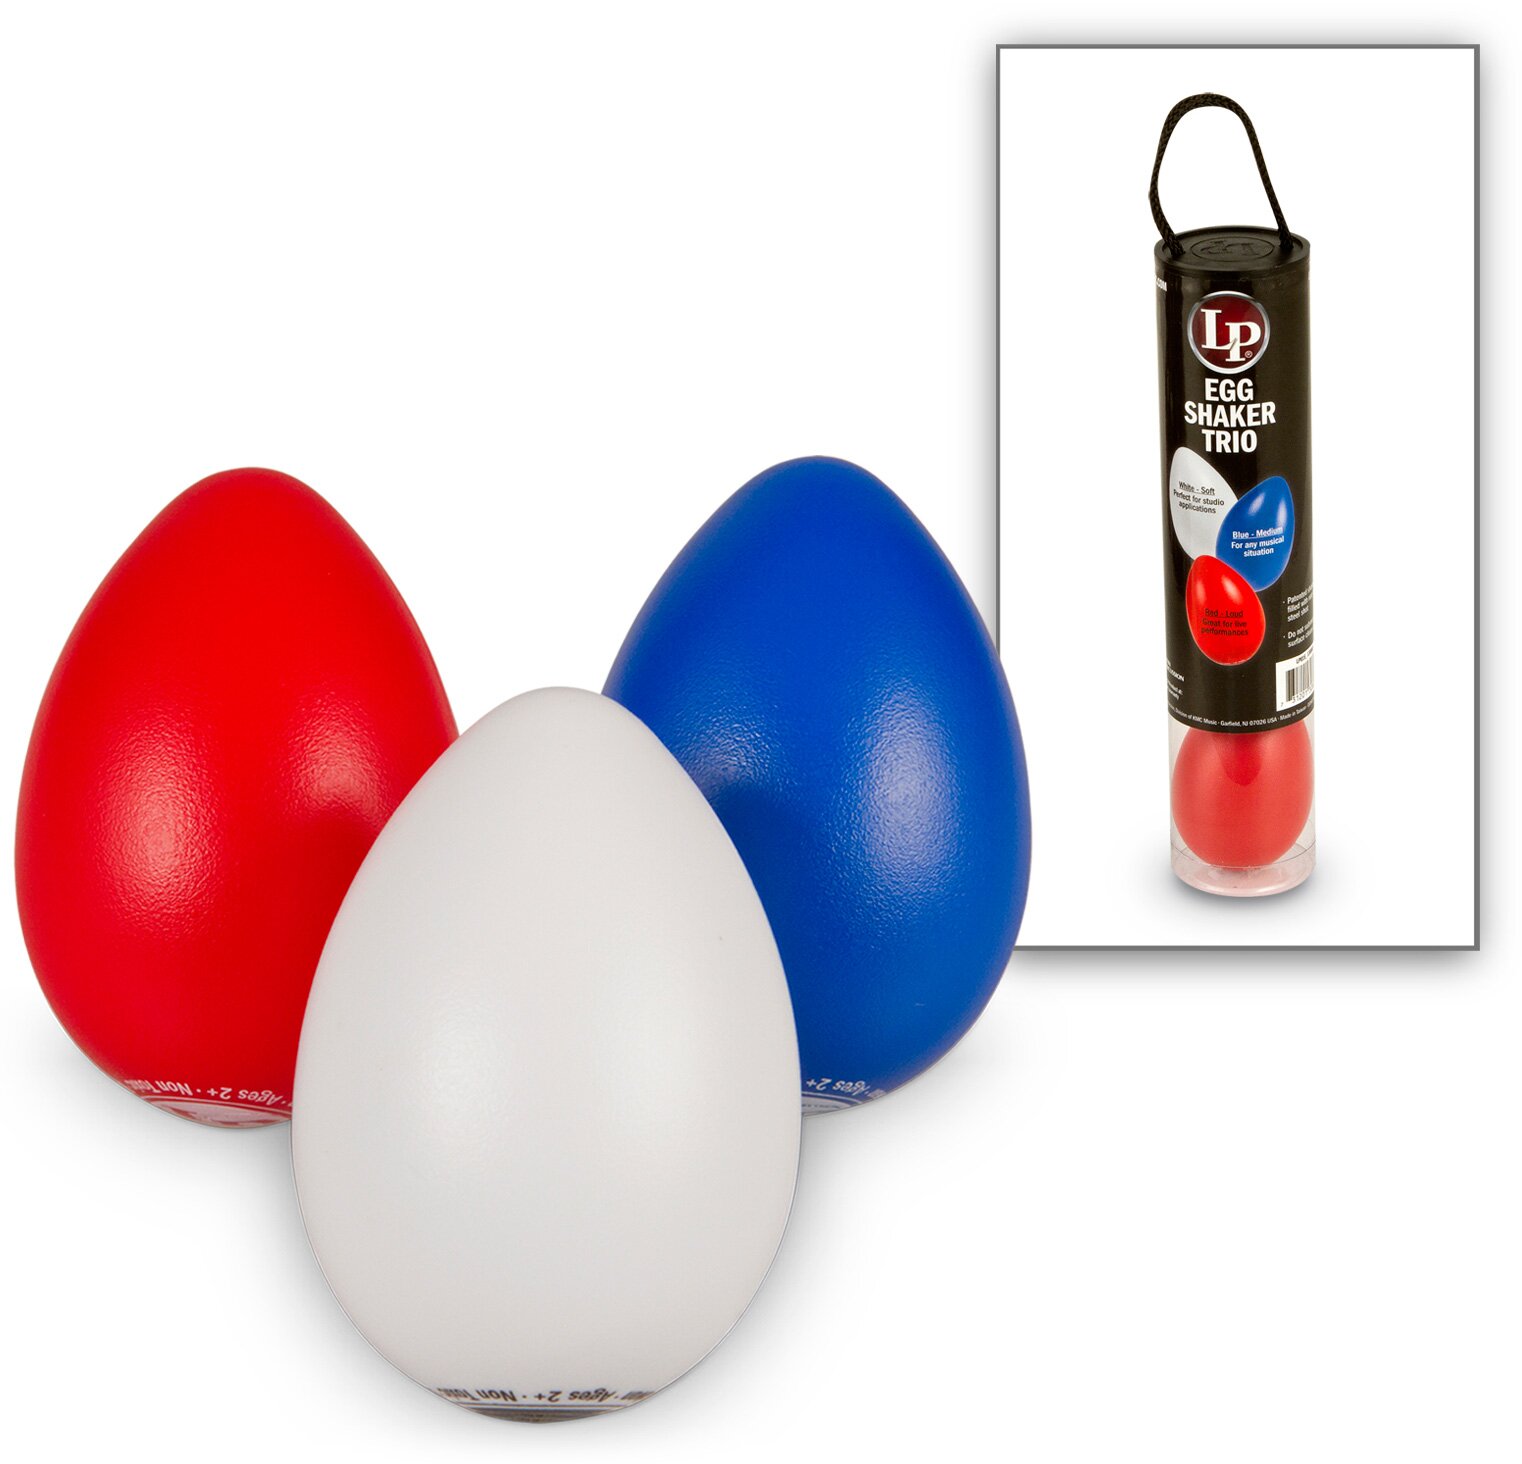 Latin Percussion LP016 Egg Shaker trio package : photo 1